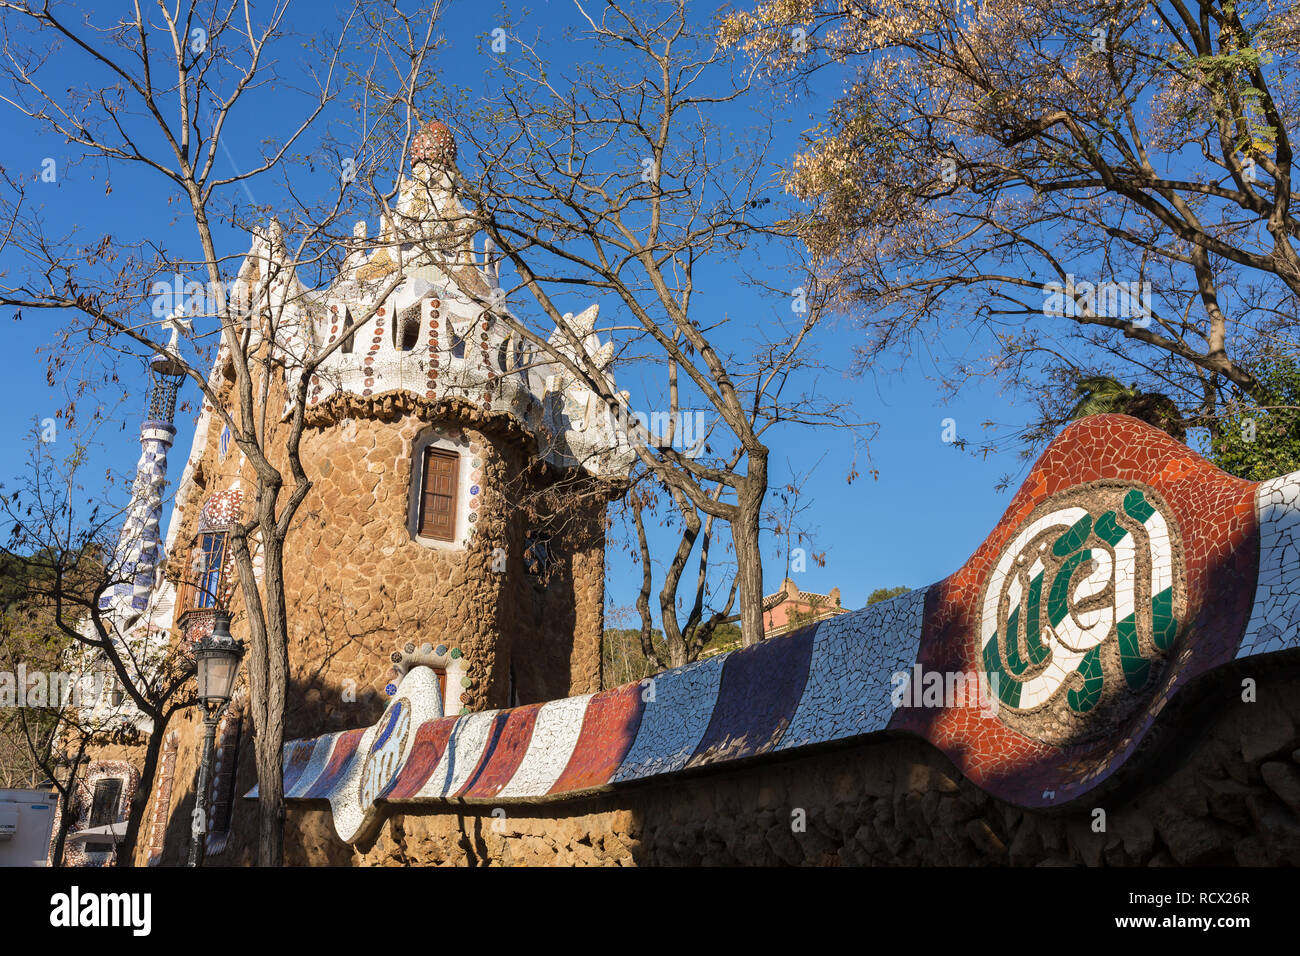 Barcelona, Spain - March 28, 2018: Part of the stone fence of Park Guell in Barcelona, Spain Stock Photo